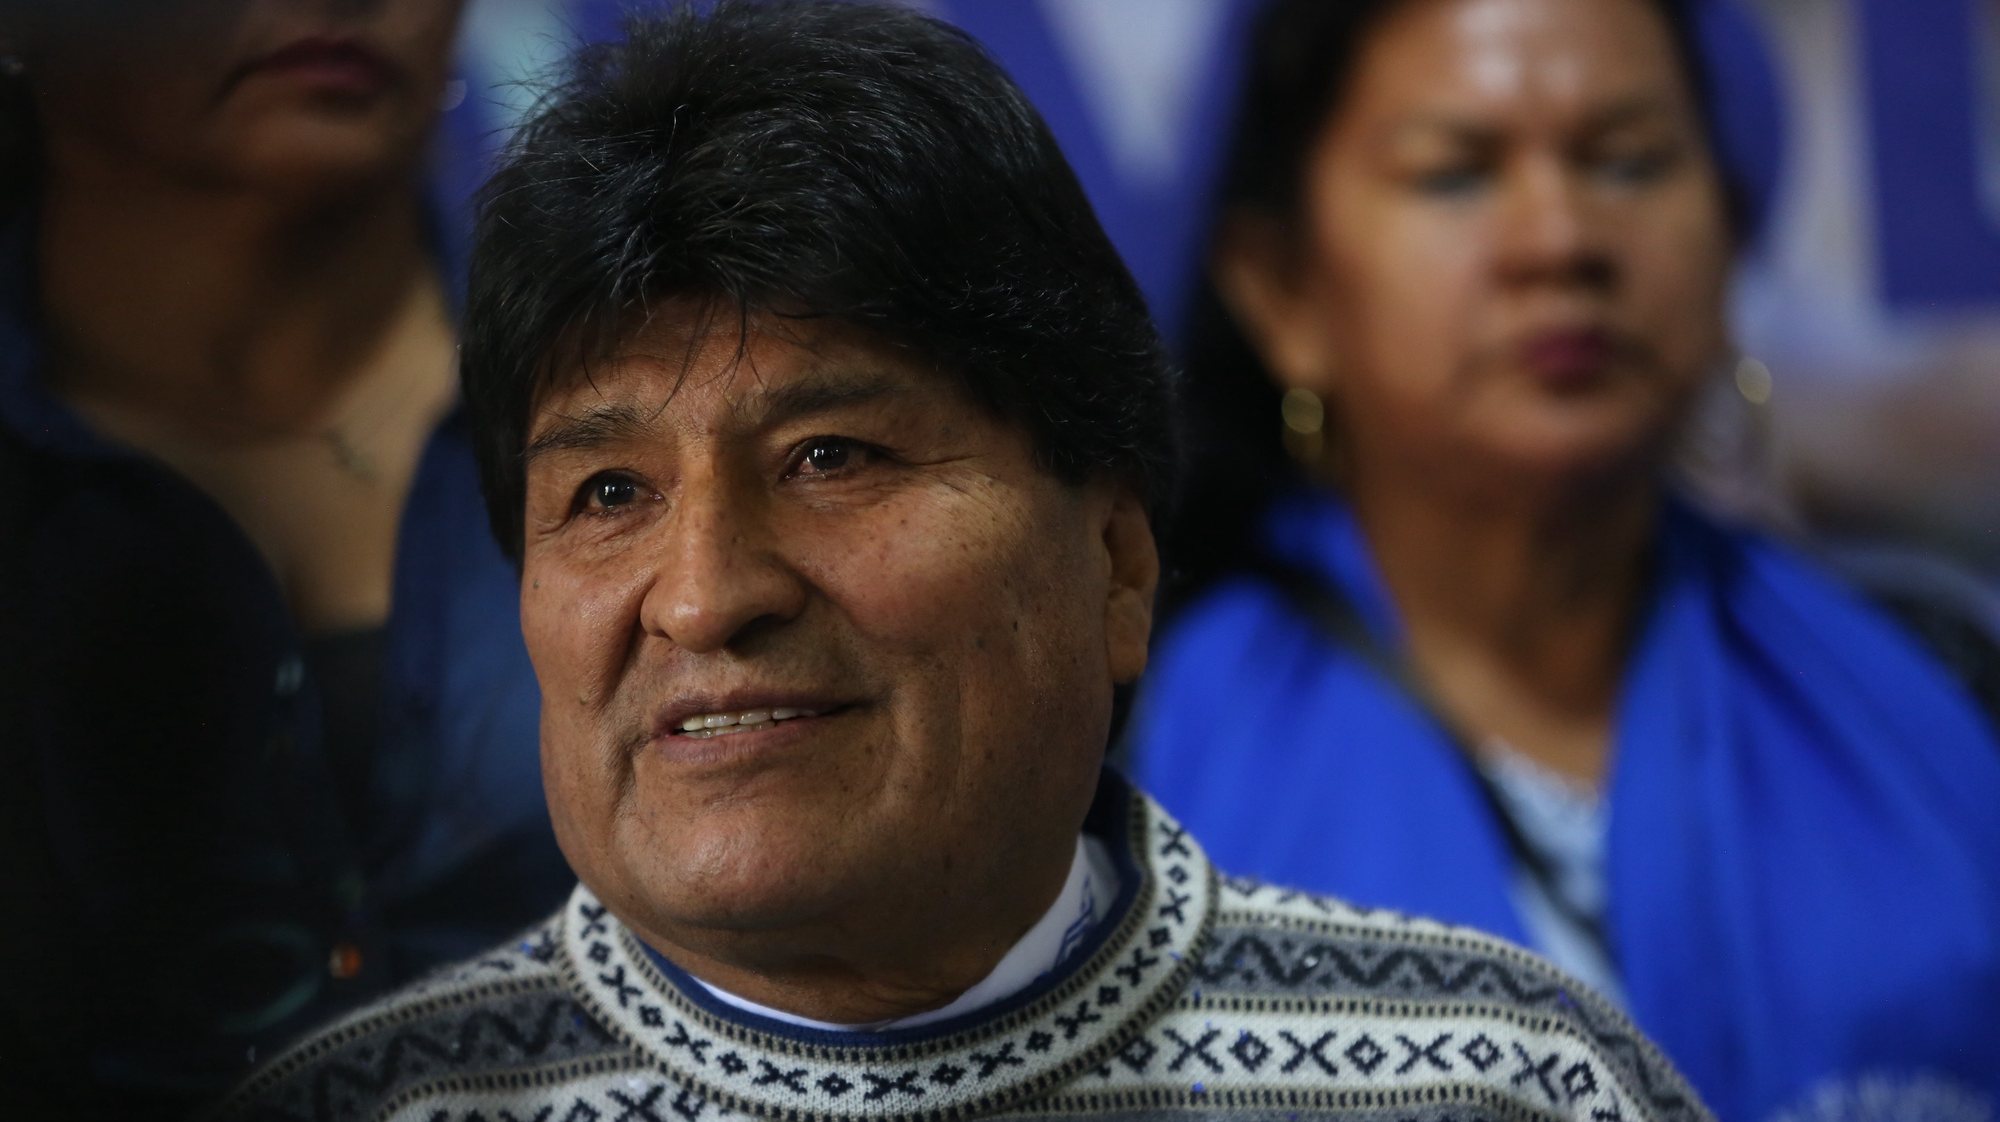 epa10914056 Former President Evo Morales participates in a press conference at the house of the Movement Al Socialism, MAS, in La Paz, Bolivia, 11 October 2023. The former president and leader of the ruling Movement towards Socialism (MAS), Evo Morales, denounced this 11 October a &#039;family business&#039; between the president of the country, Luis Arce, with one of his sons, which Morales calls an act of &#039;corruption.&#039;  EPA/LUIS GANDARILLAS